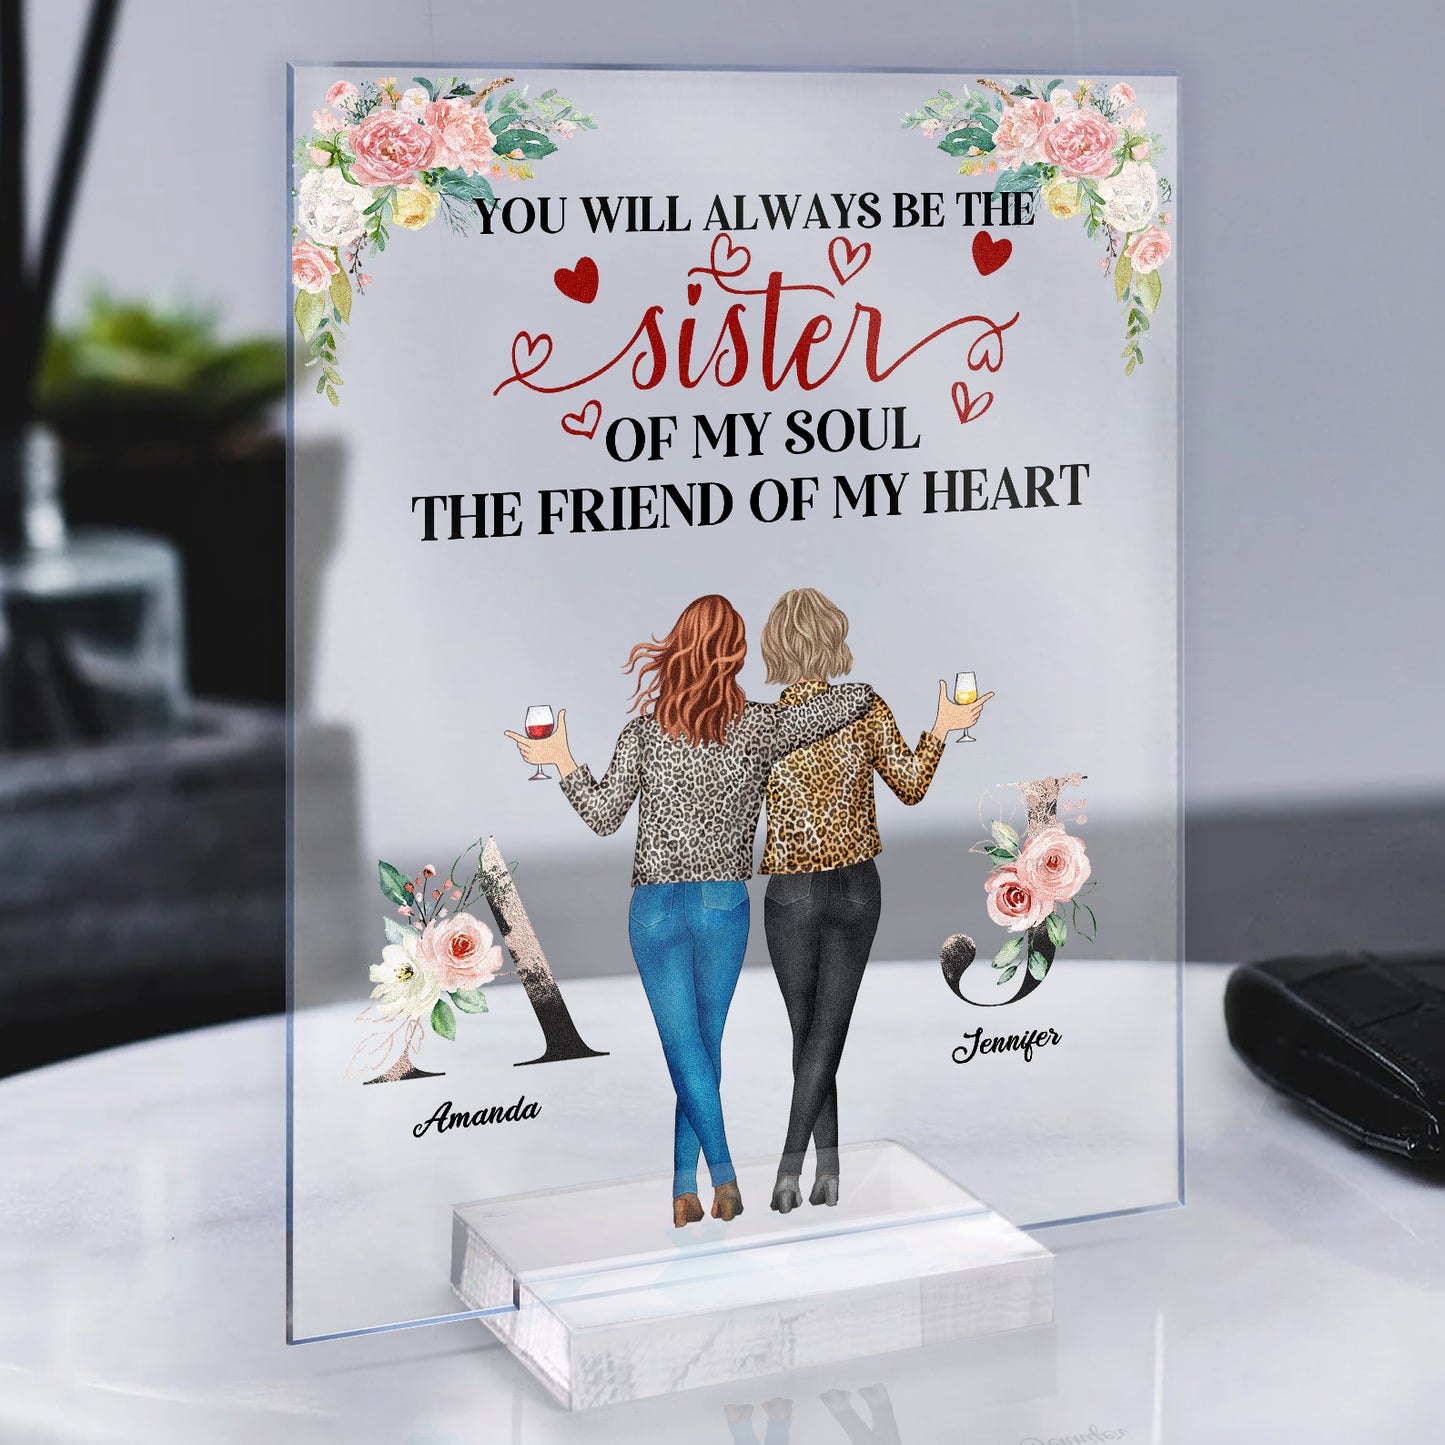 I Love That You're My Soul Sister - Bestie Personalized Custom